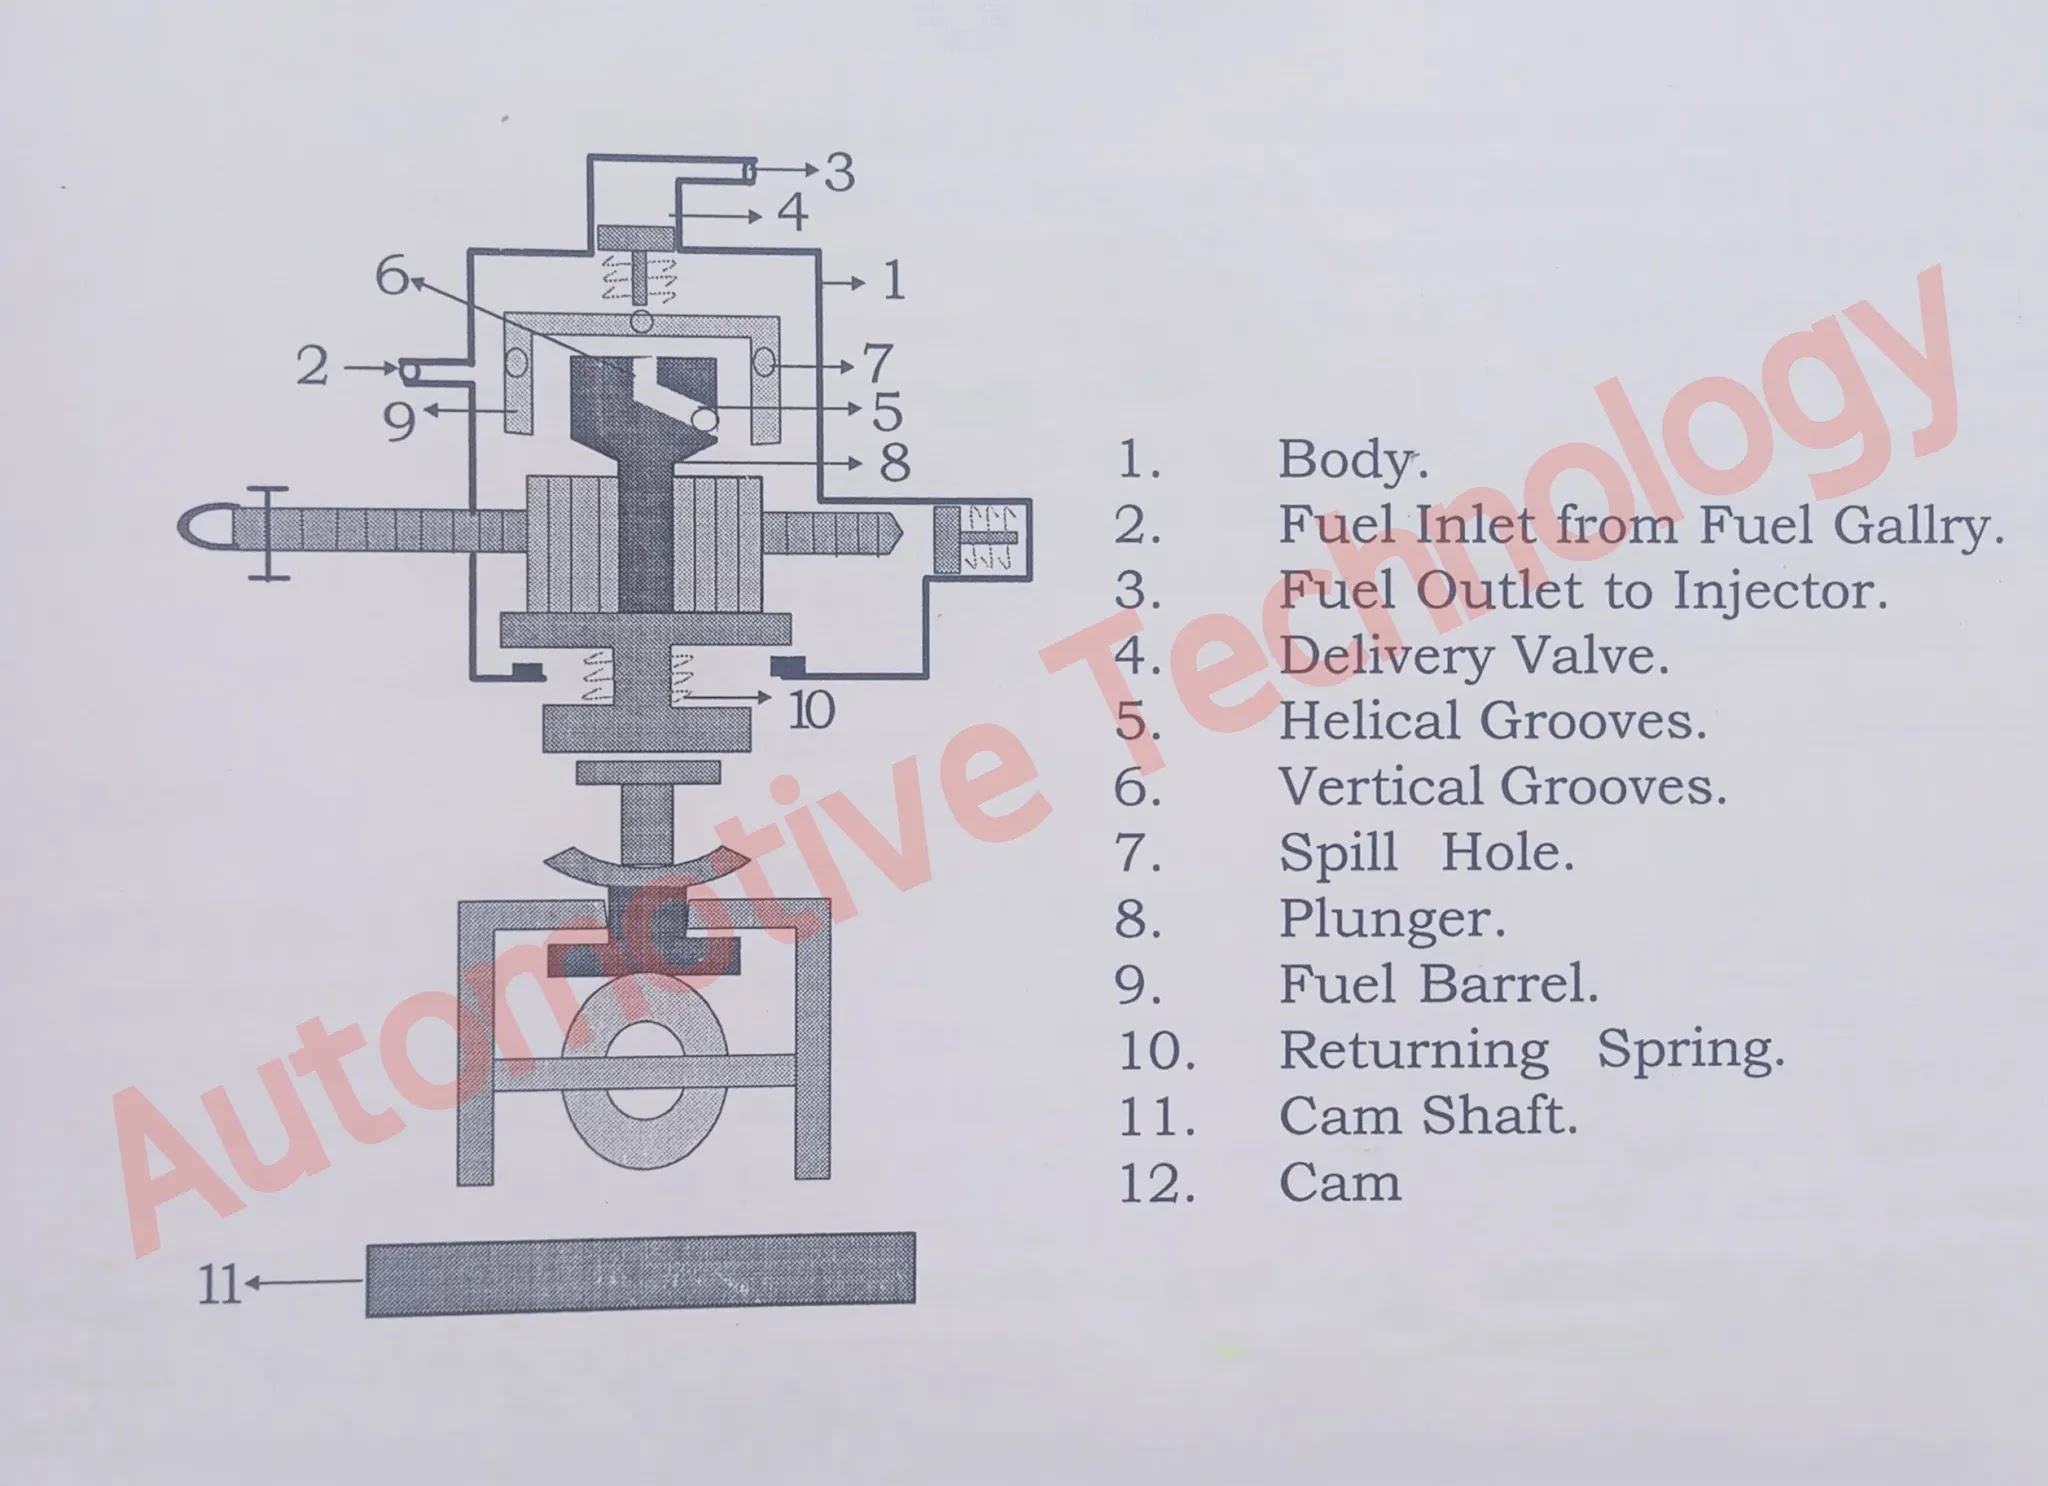 Plunger unit of Fuel Injection : and working